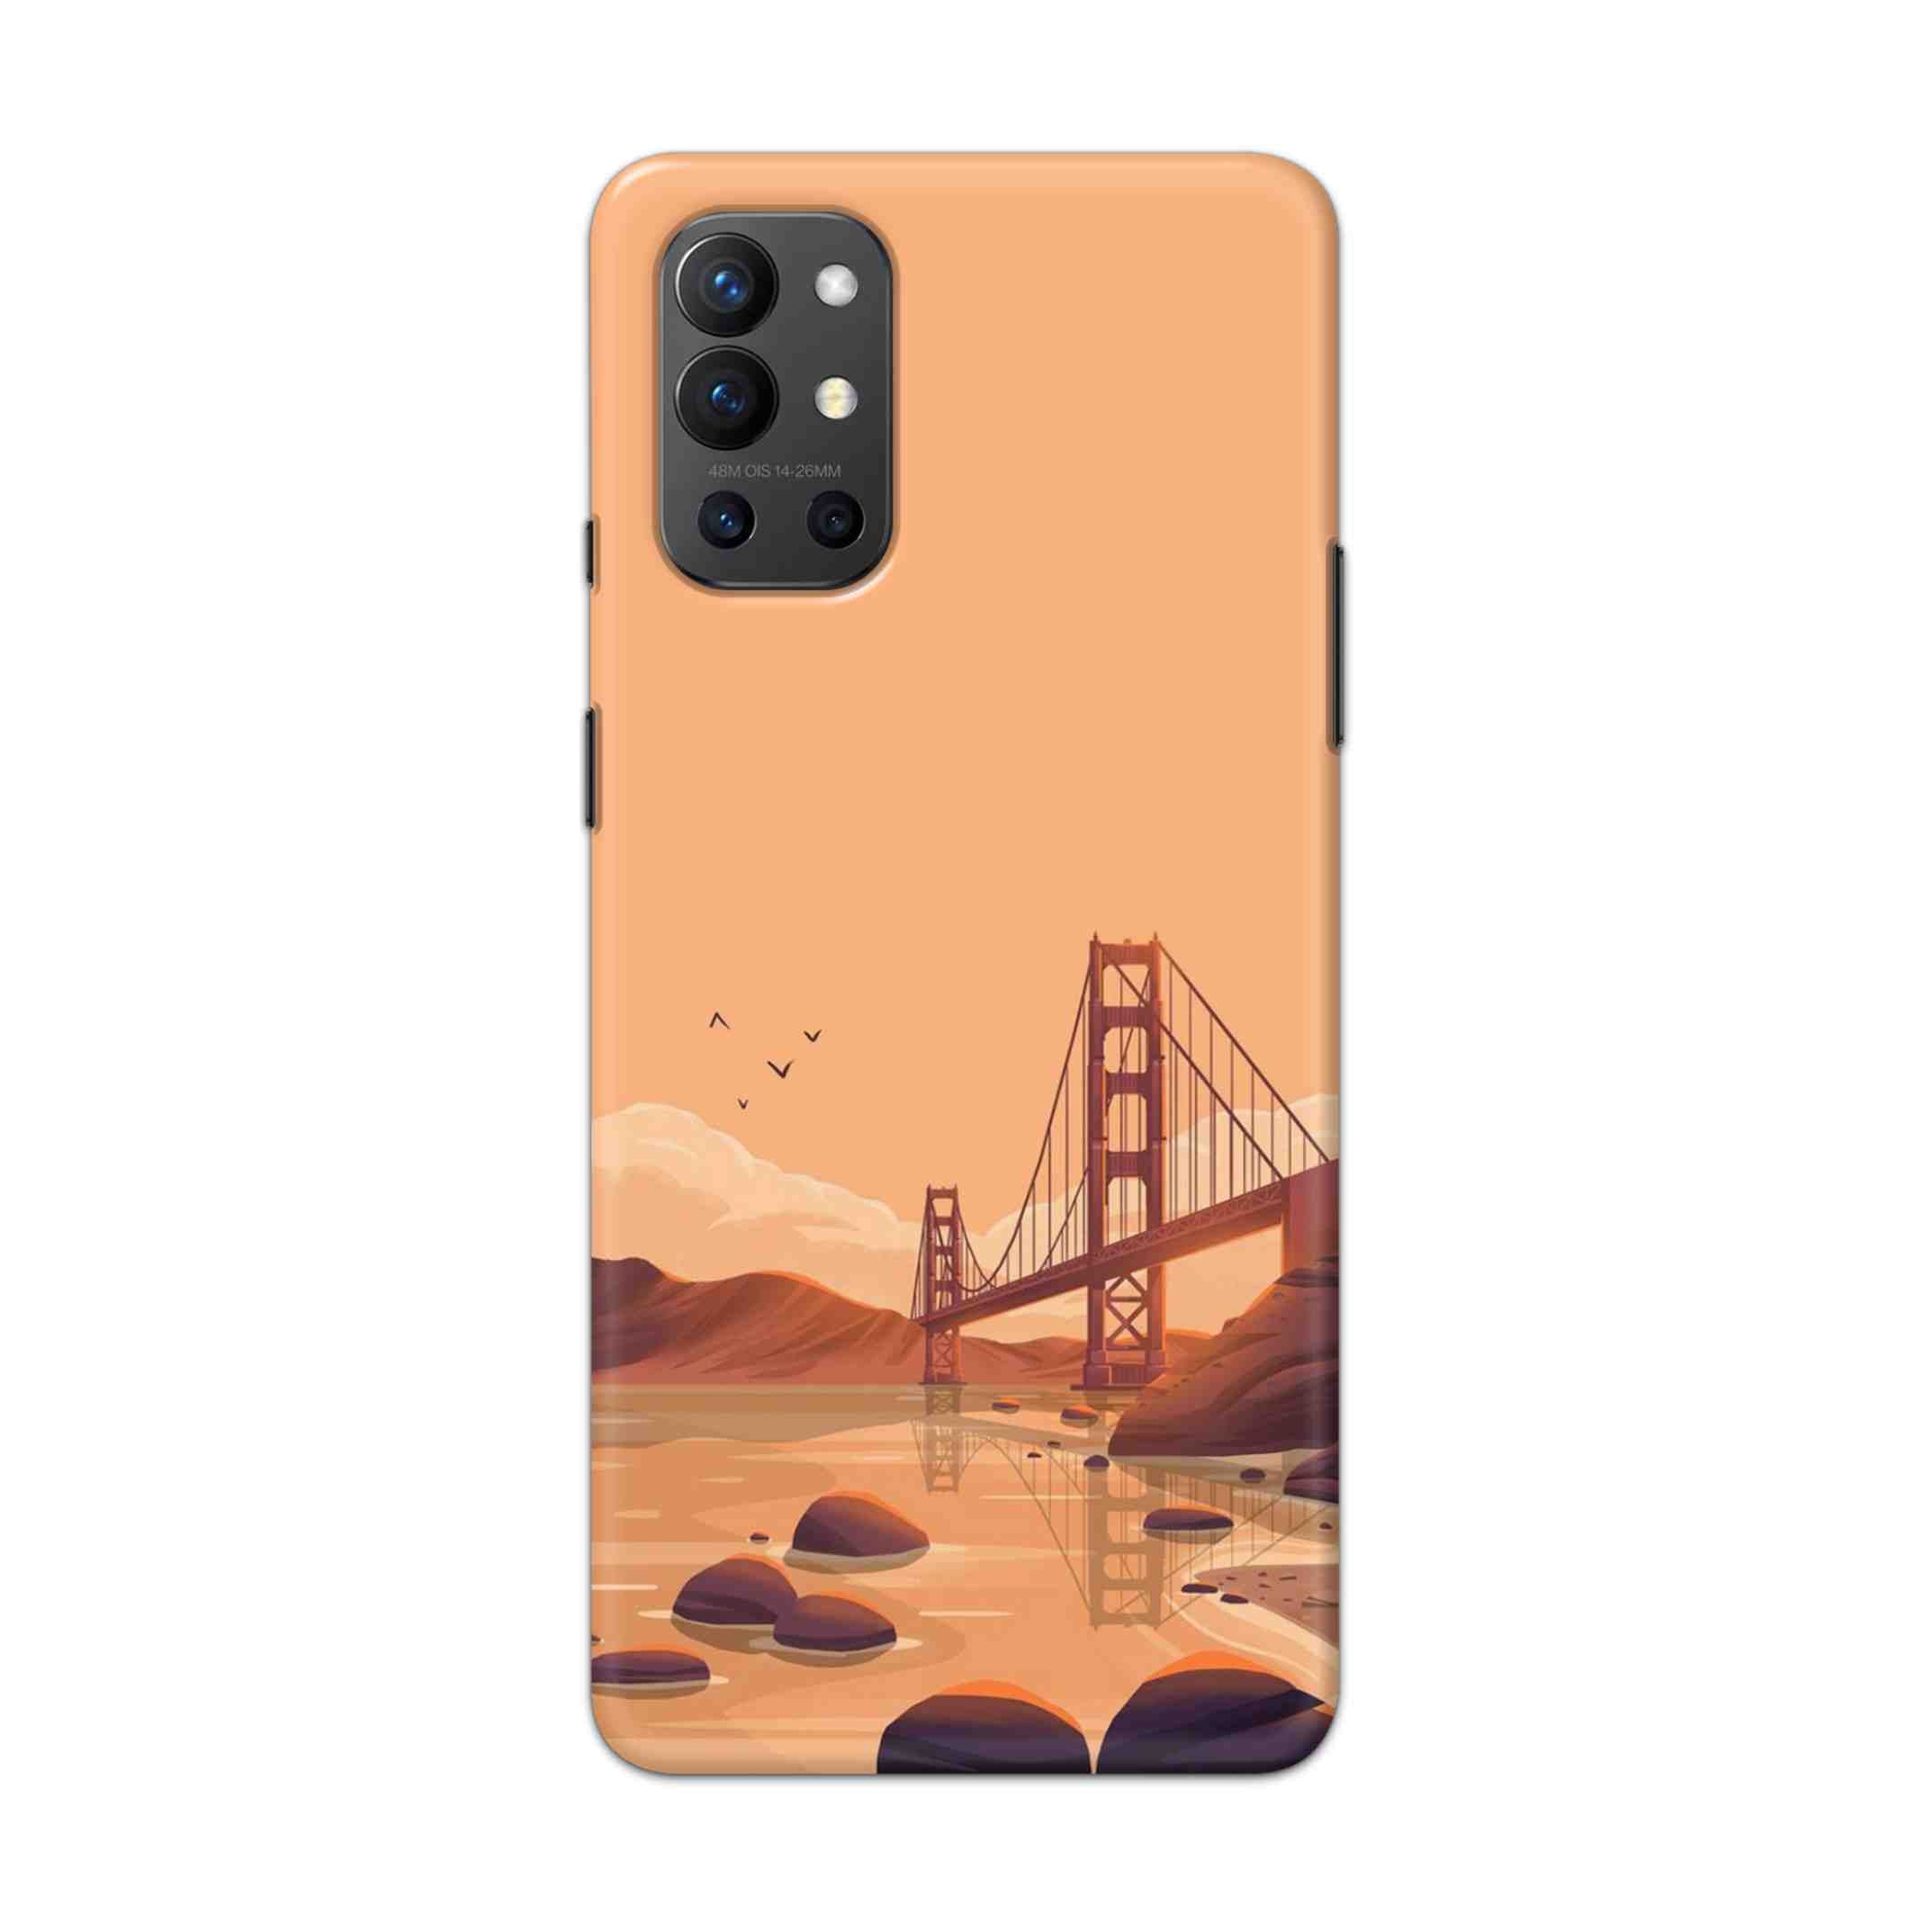 Buy San Francisco Hard Back Mobile Phone Case Cover For OnePlus 9R / 8T Online